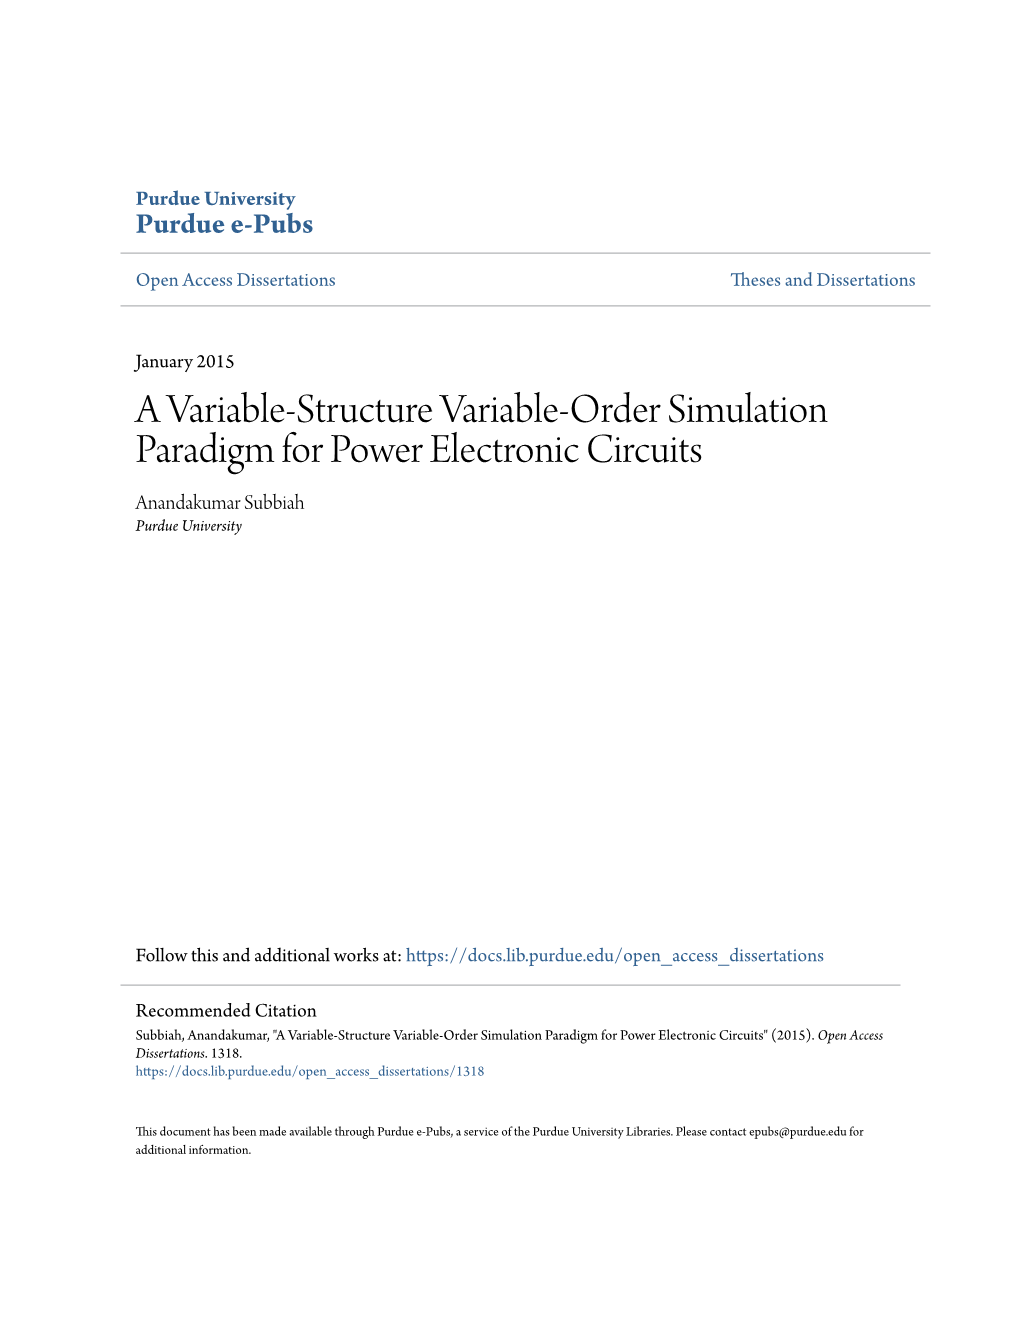 A Variable-Structure Variable-Order Simulation Paradigm for Power Electronic Circuits Anandakumar Subbiah Purdue University